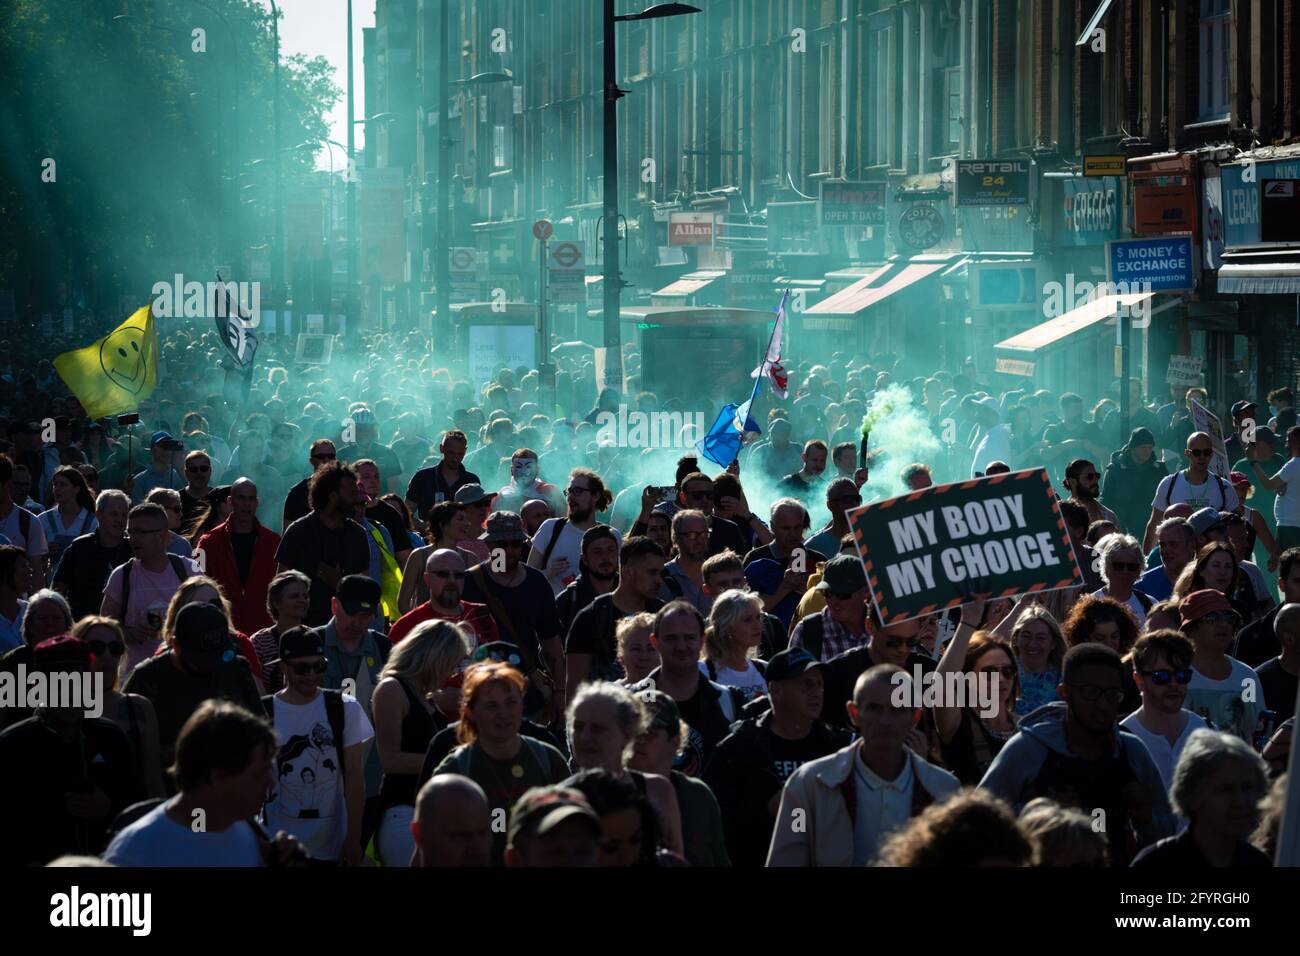 Manchester, UK. 29th May, 2021. People prepare to march ahead of a anti-lockdown protest. The number of people attending the protests has increased month on month since the introduction of the COVID-19 restrictions. Credit: Andy Barton/Alamy Live News Stock Photo